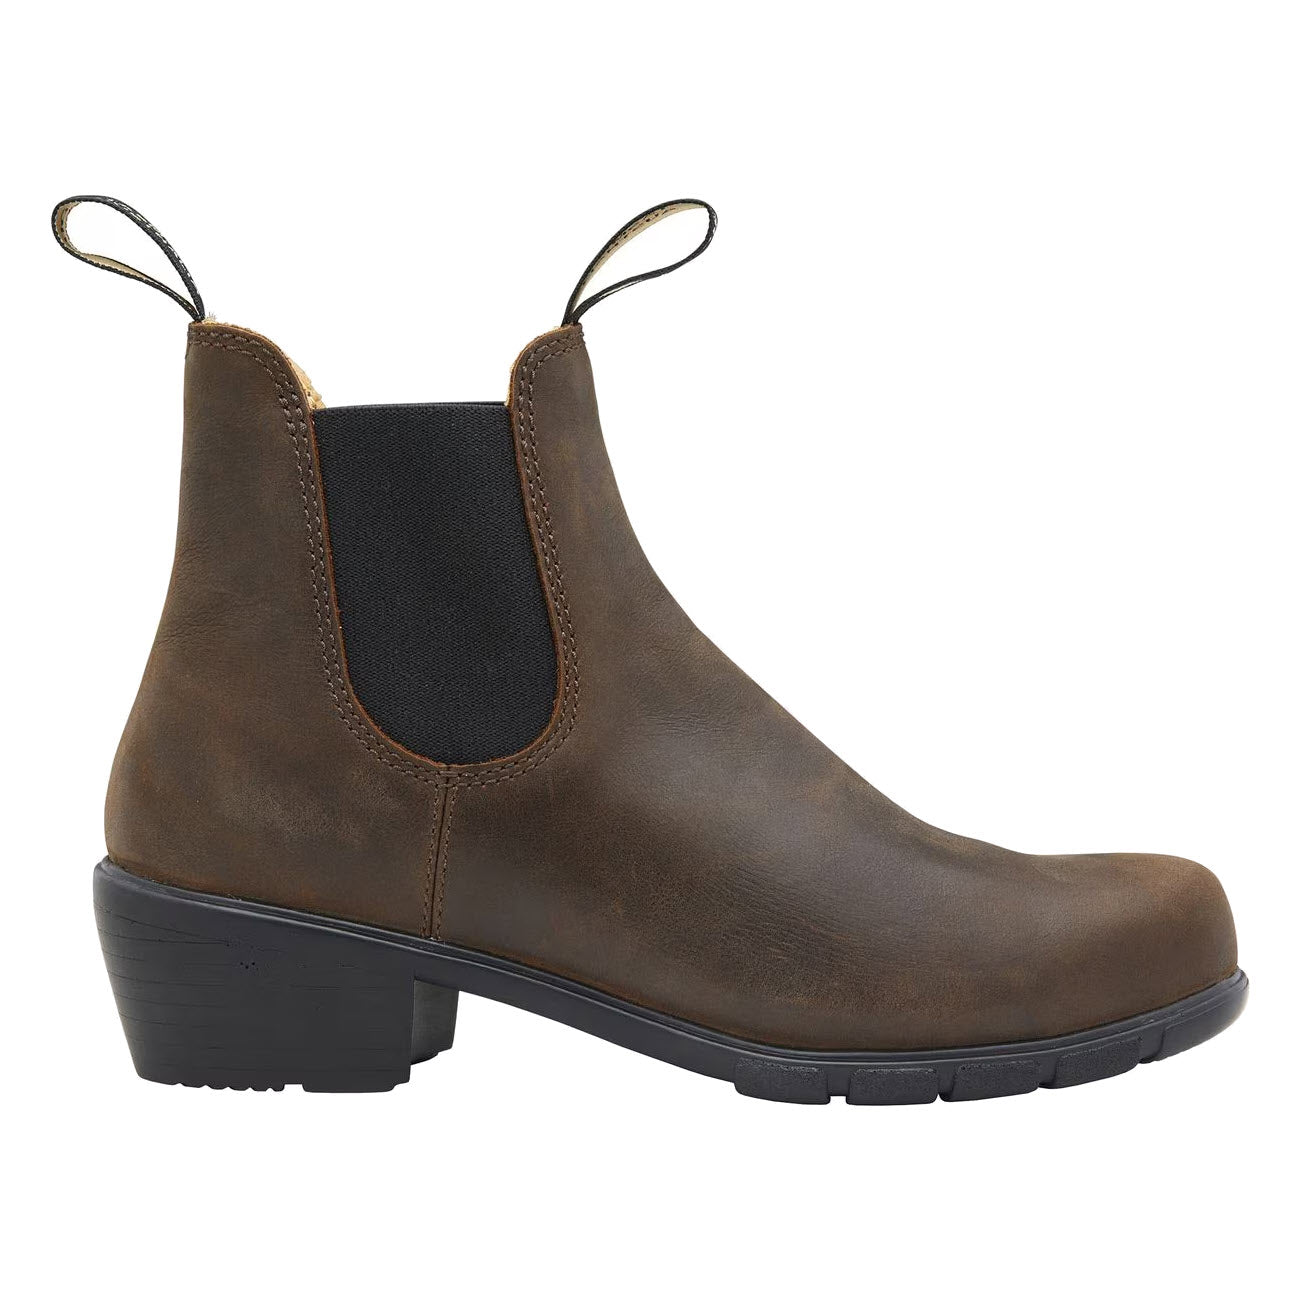 Blundstone 1673 Heel Antique Brown - Womens water-resistant leather Chelsea boot with black elastic side panel on a white background.